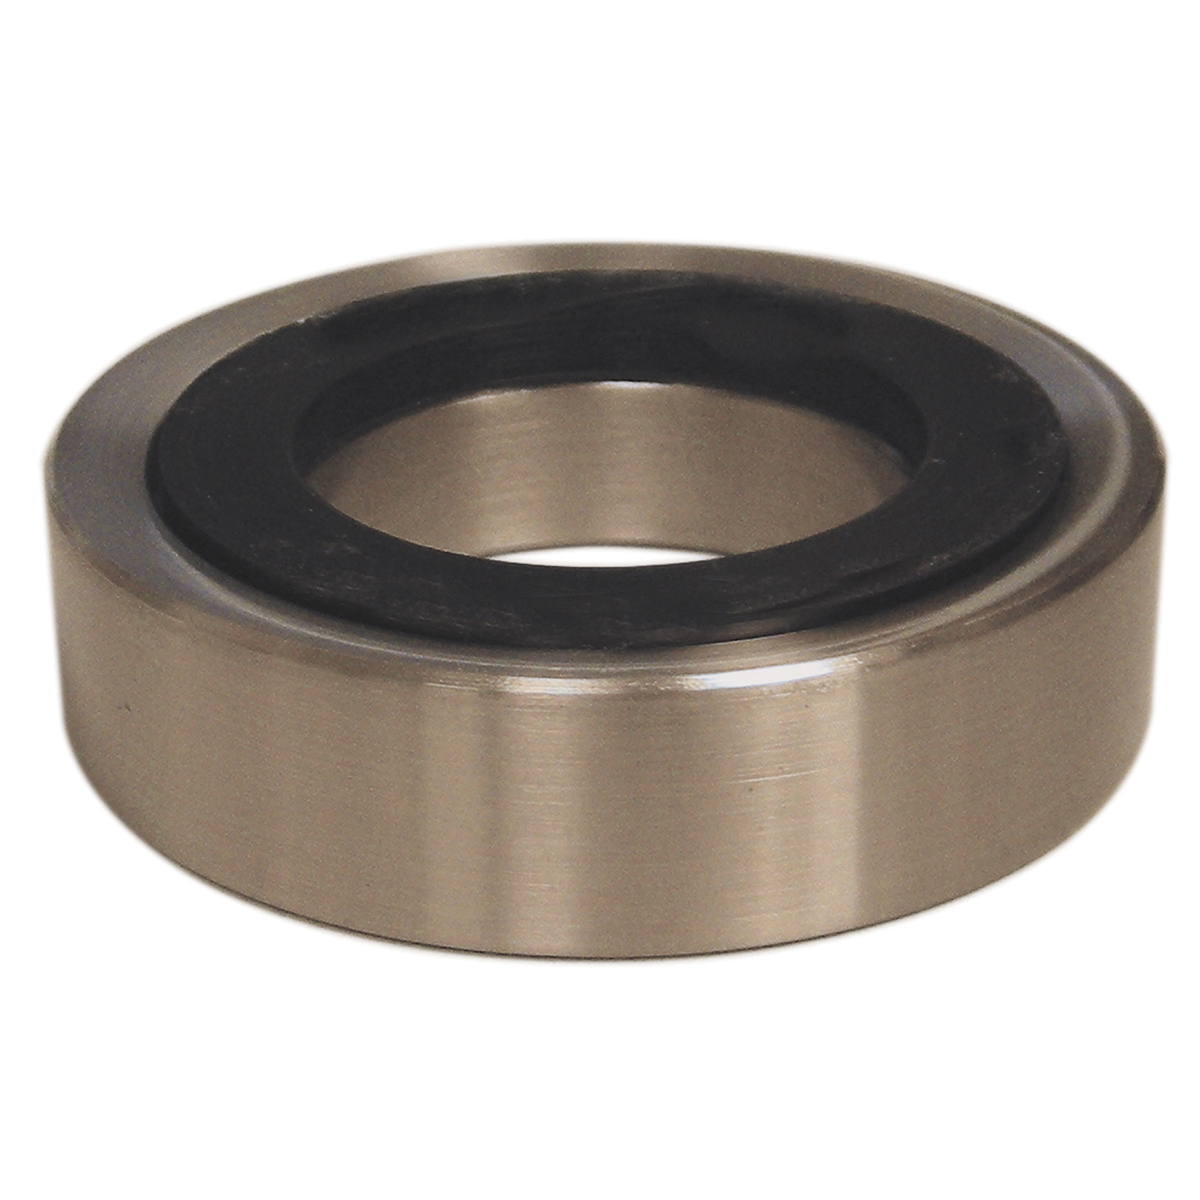 High Quality Vessel Sink Mounting Ring in Chrome | Kraus USA